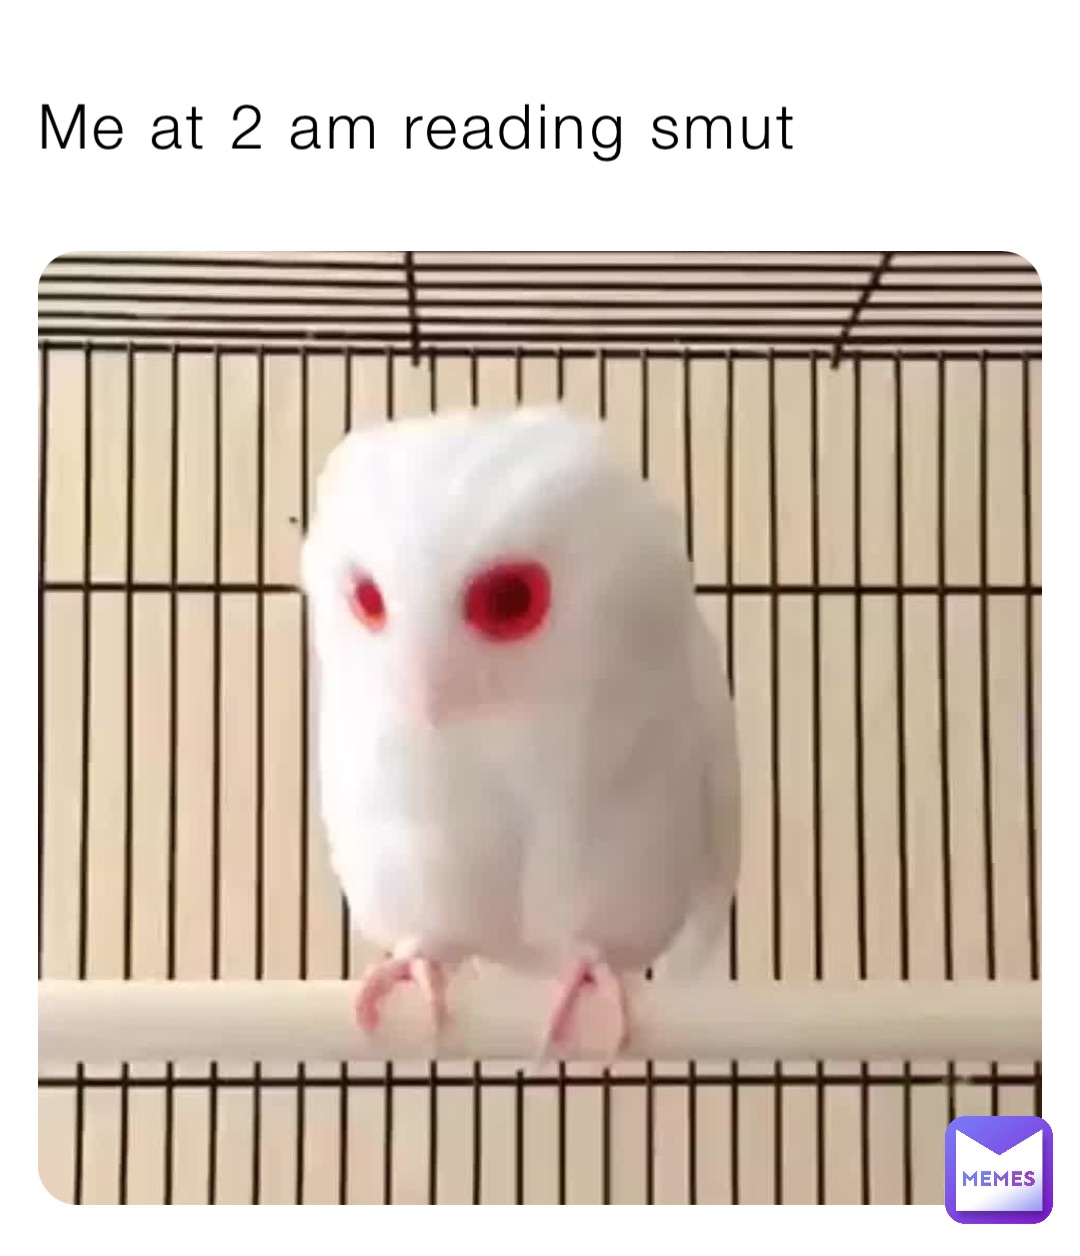 Me at 2 am reading smut